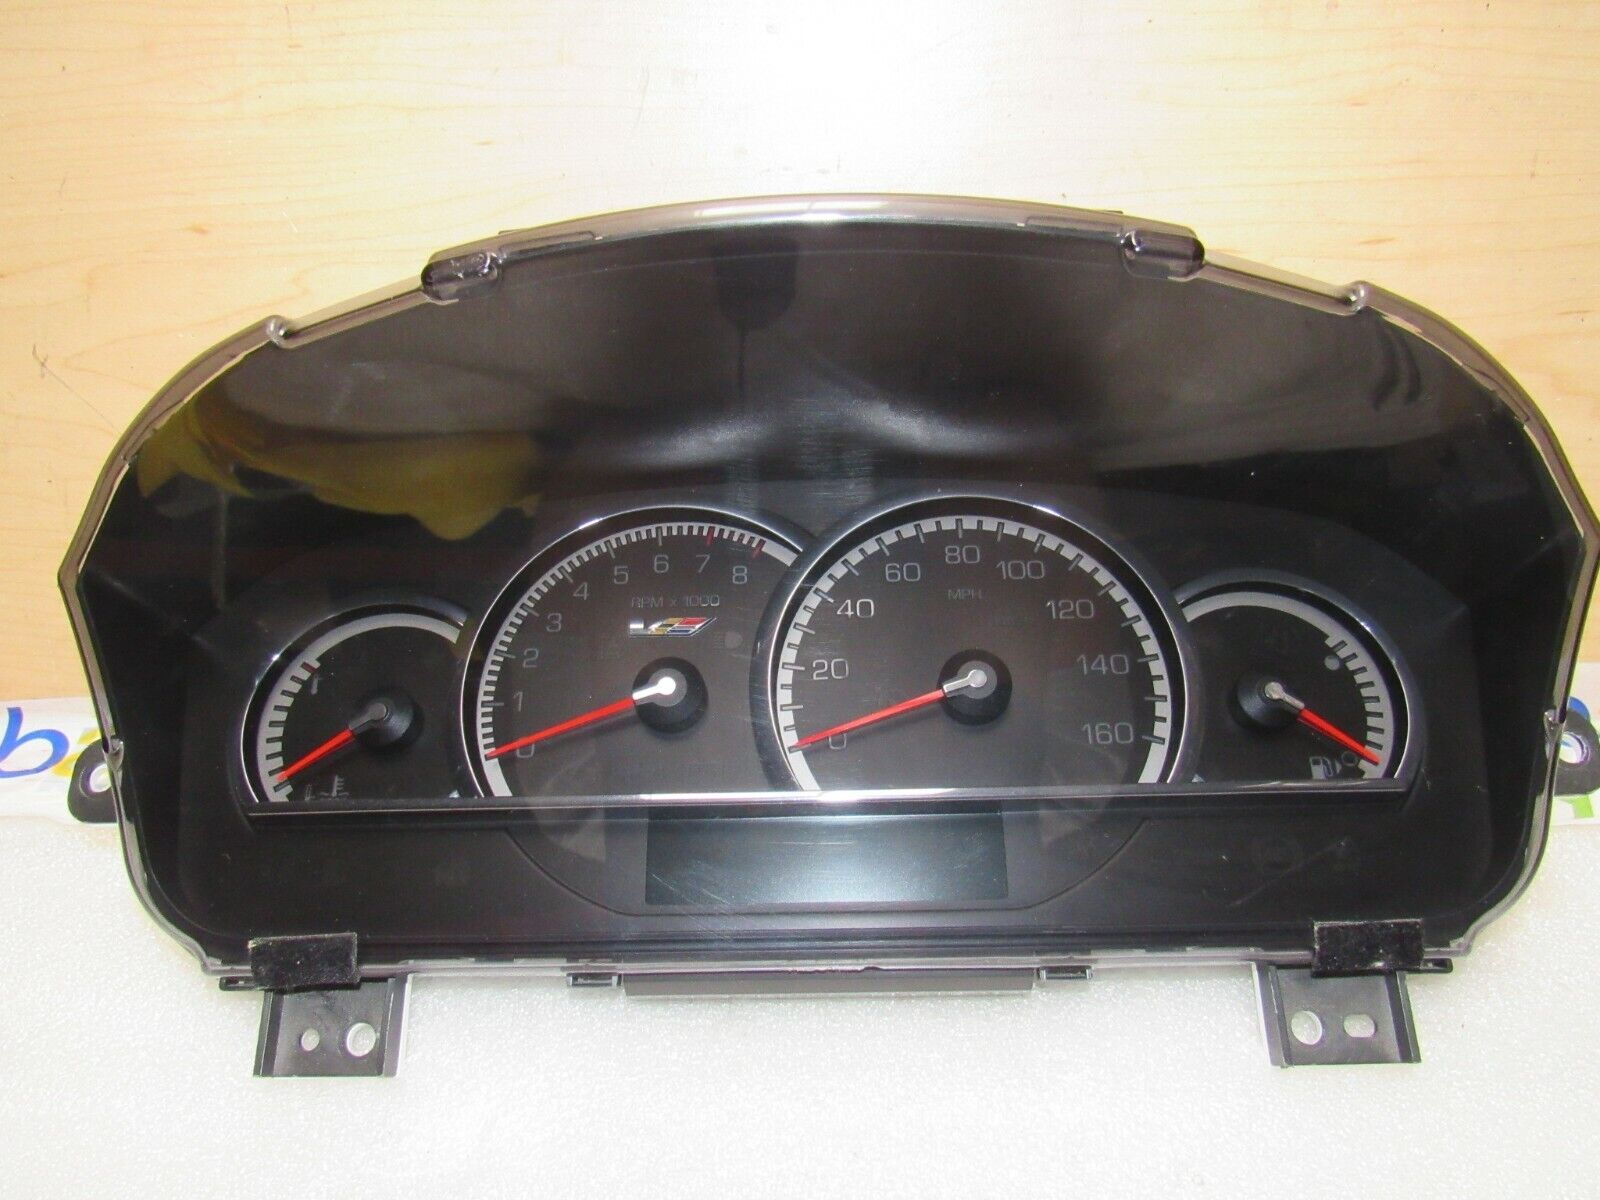 2008 CADILLAC STS-V Speedometer Instrument Gauge Cluster in MPH OEM A-12219 S-07